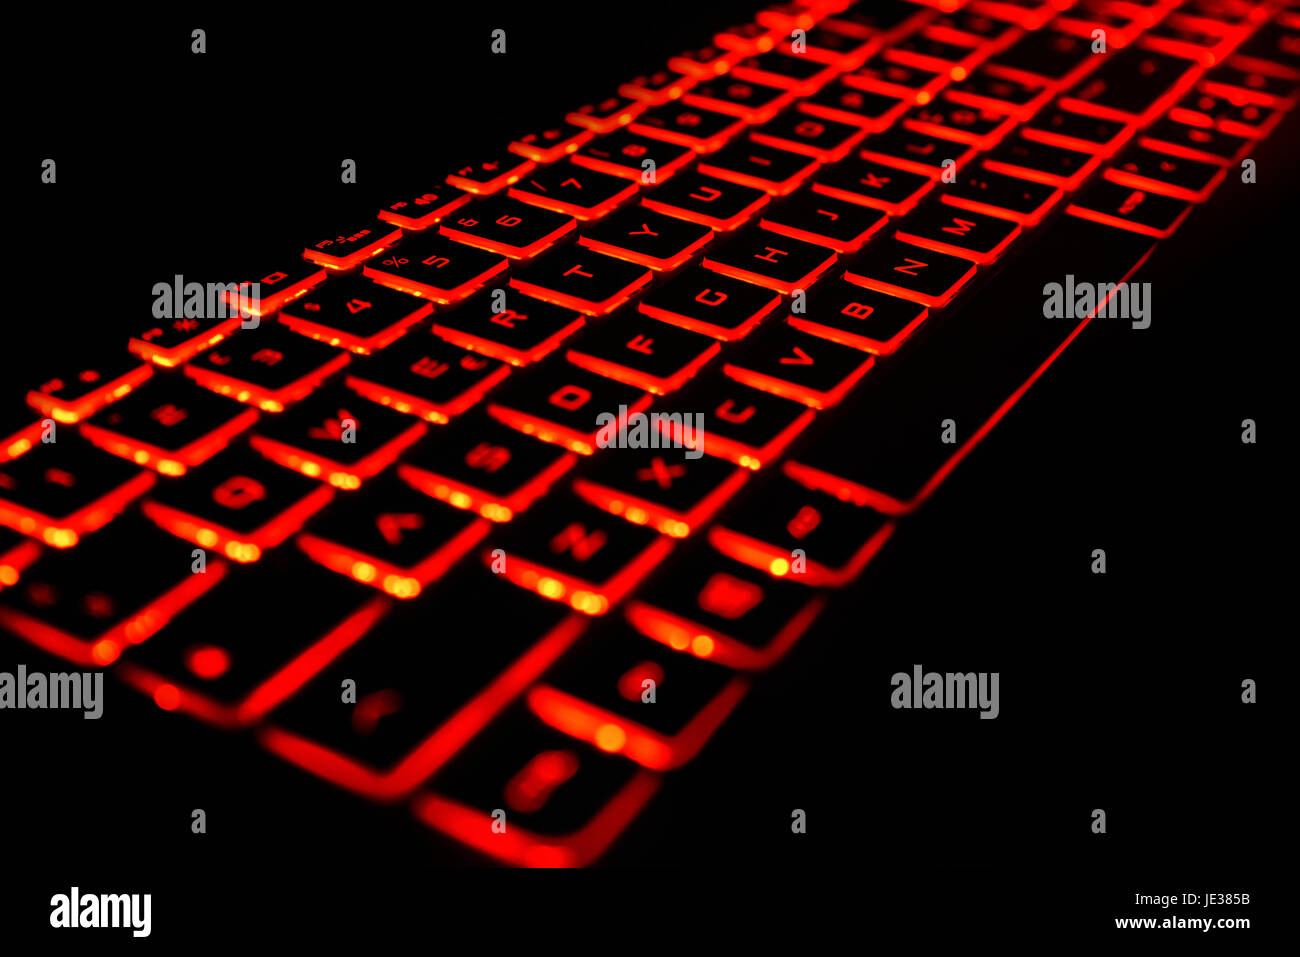 red keyboard in a black background Stock Photo